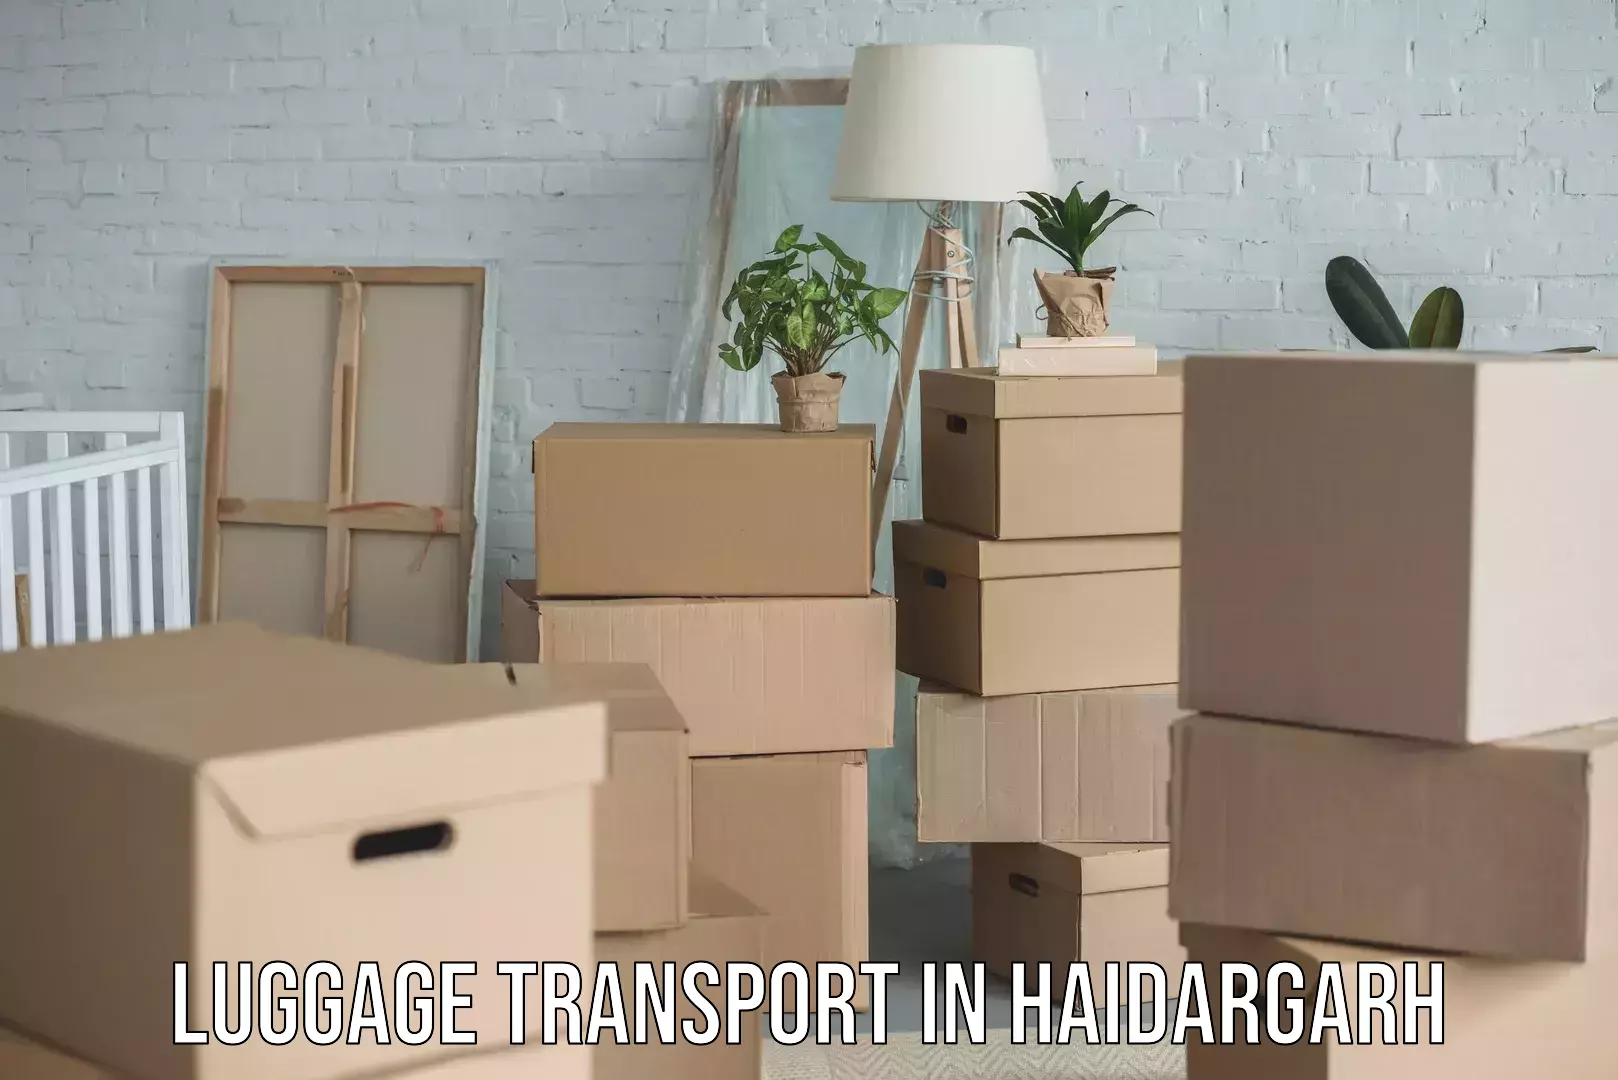 Luggage delivery system in Haidargarh